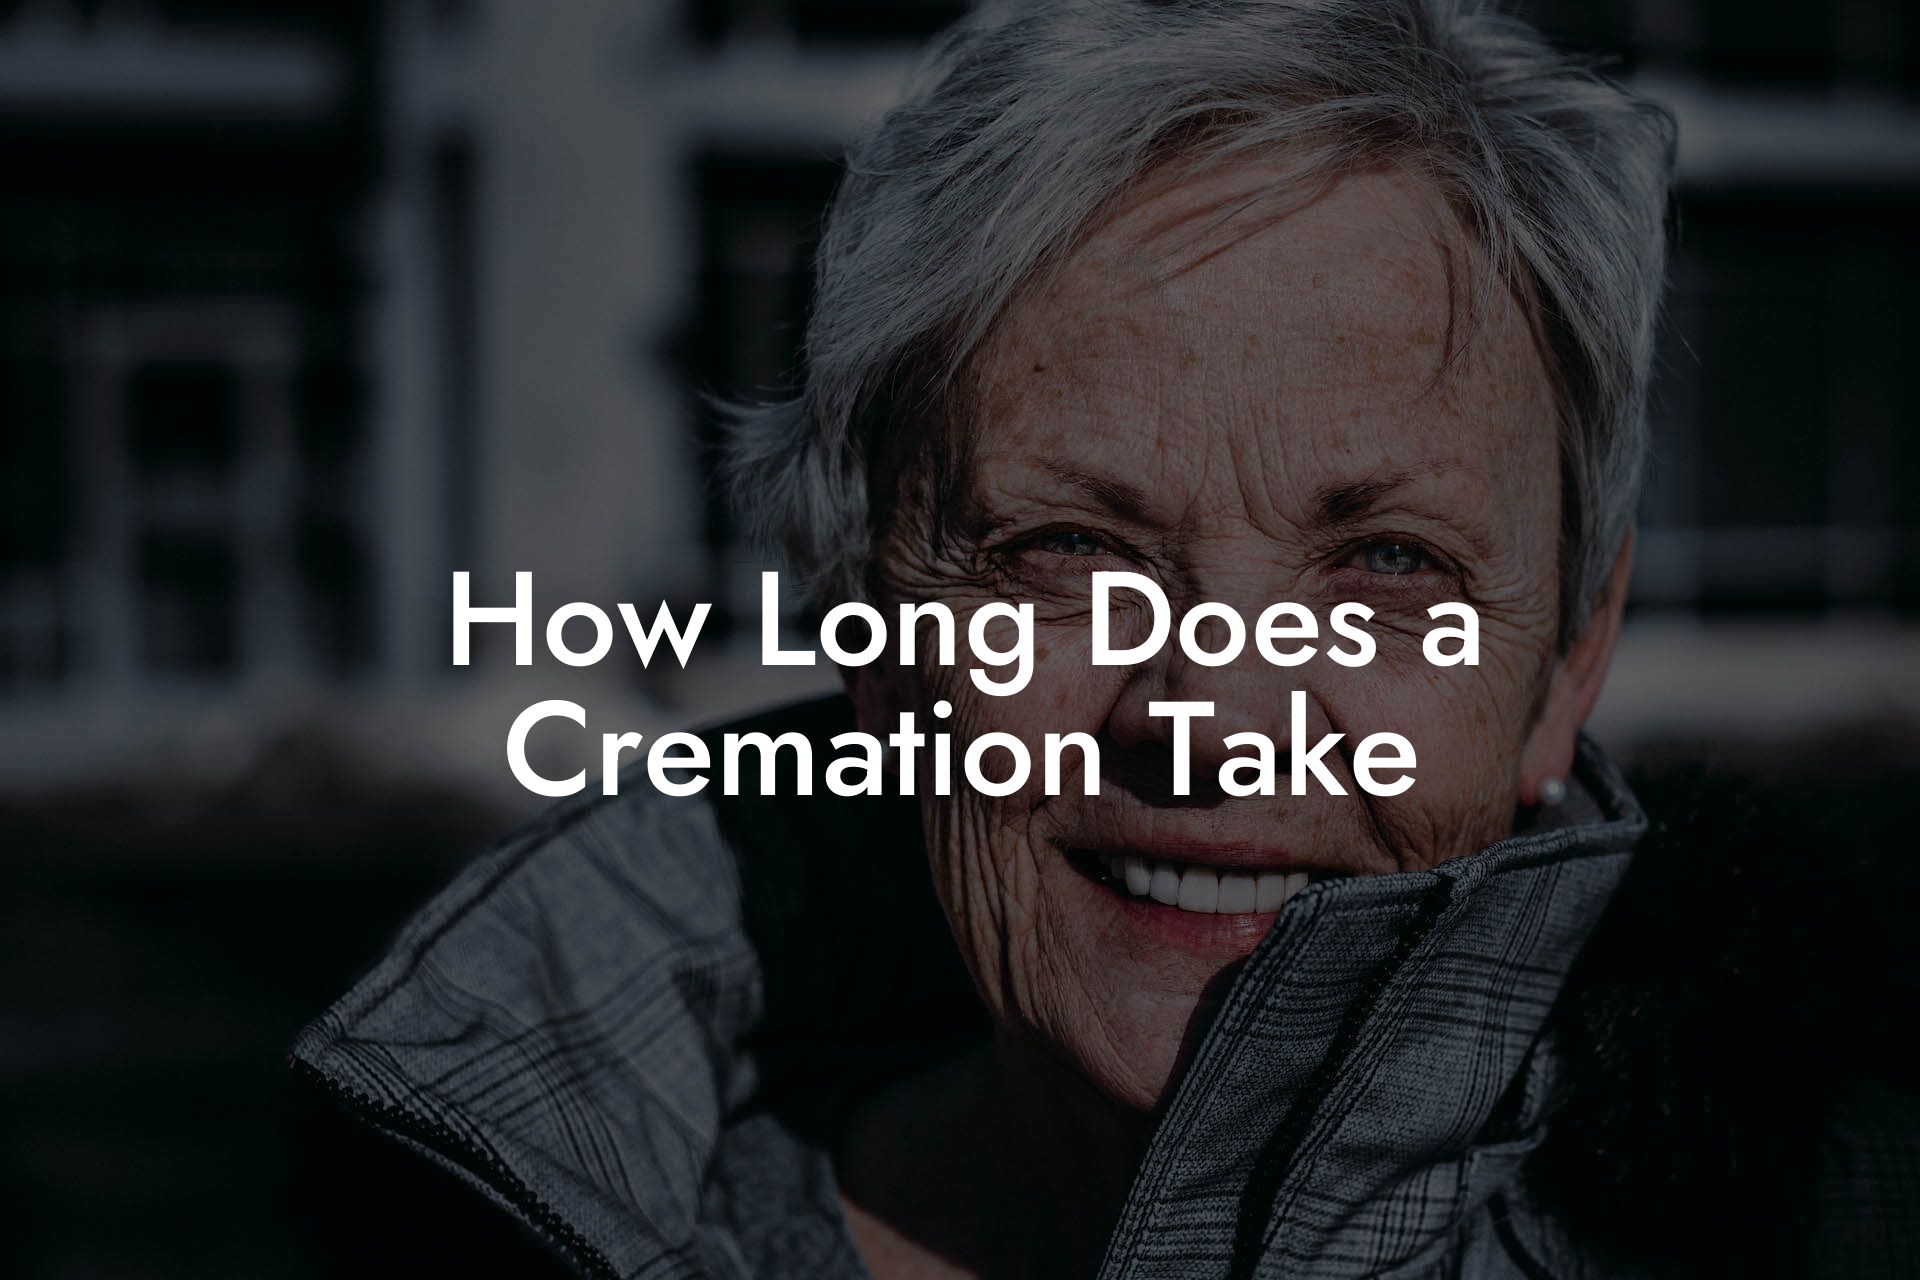 How Long Does a Cremation Take